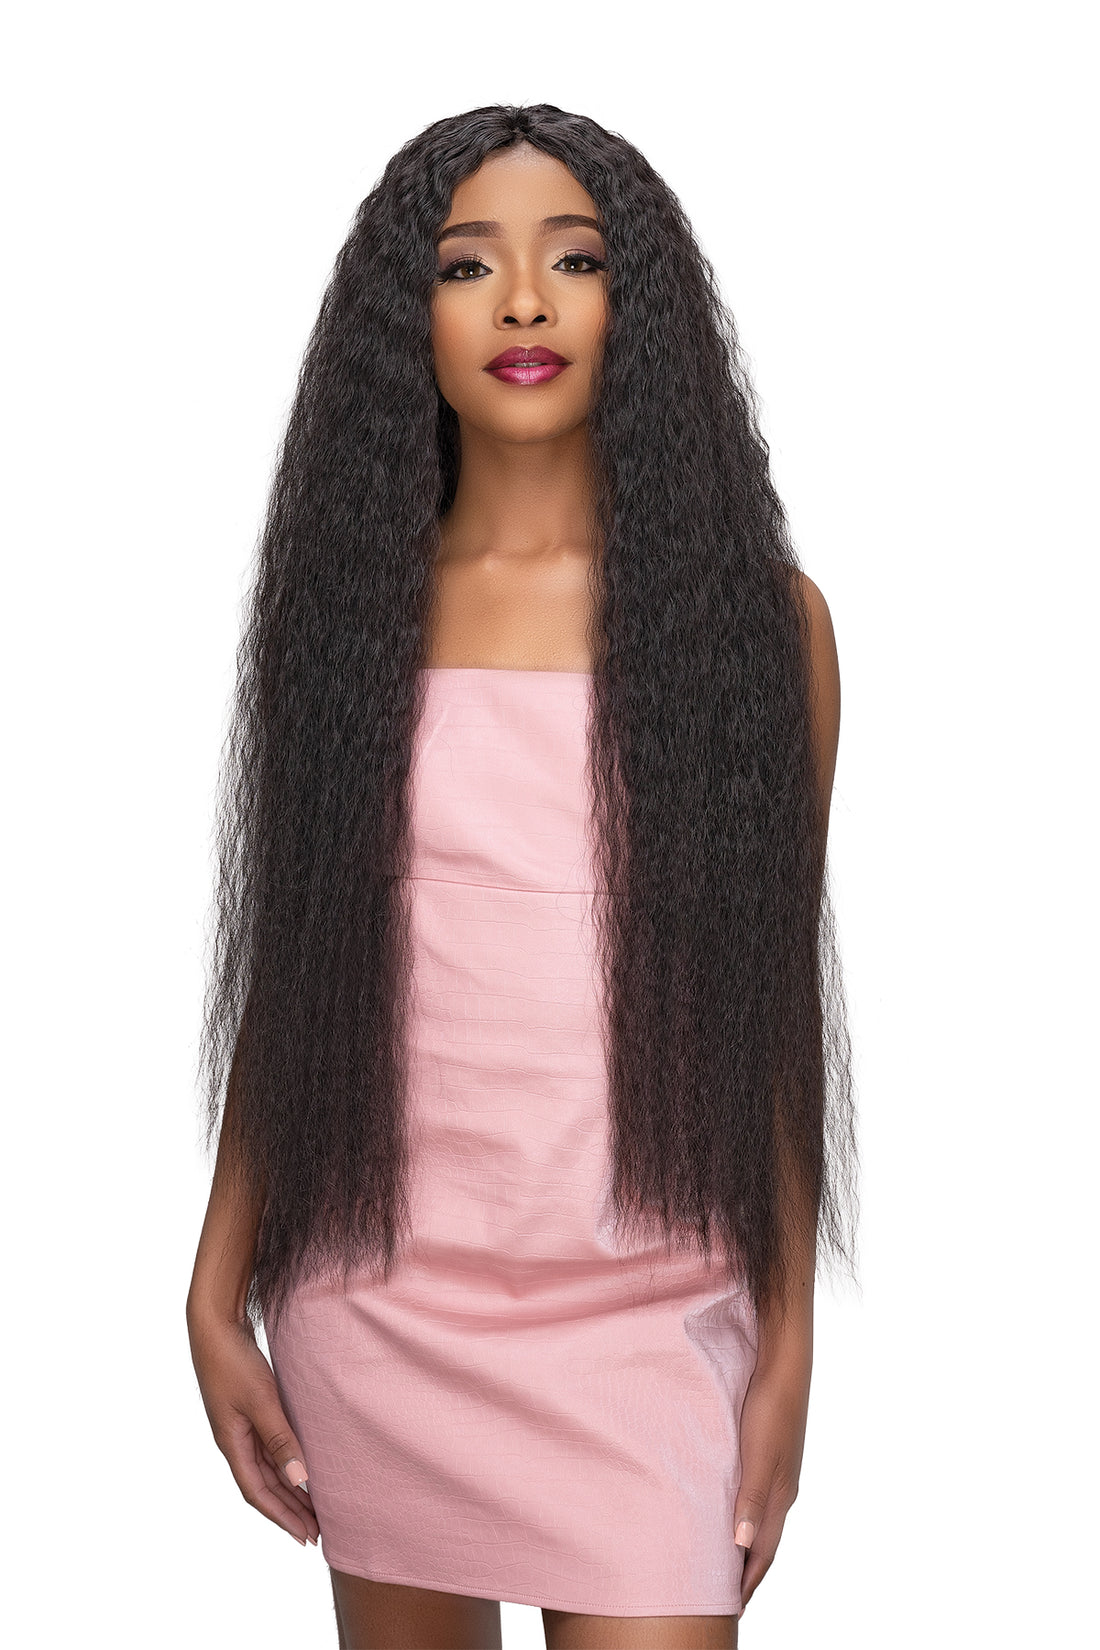 JANET COLLECTIONS - REMY ILLUSION NATURAL SUPER FRENCH HAIR BUNDLE